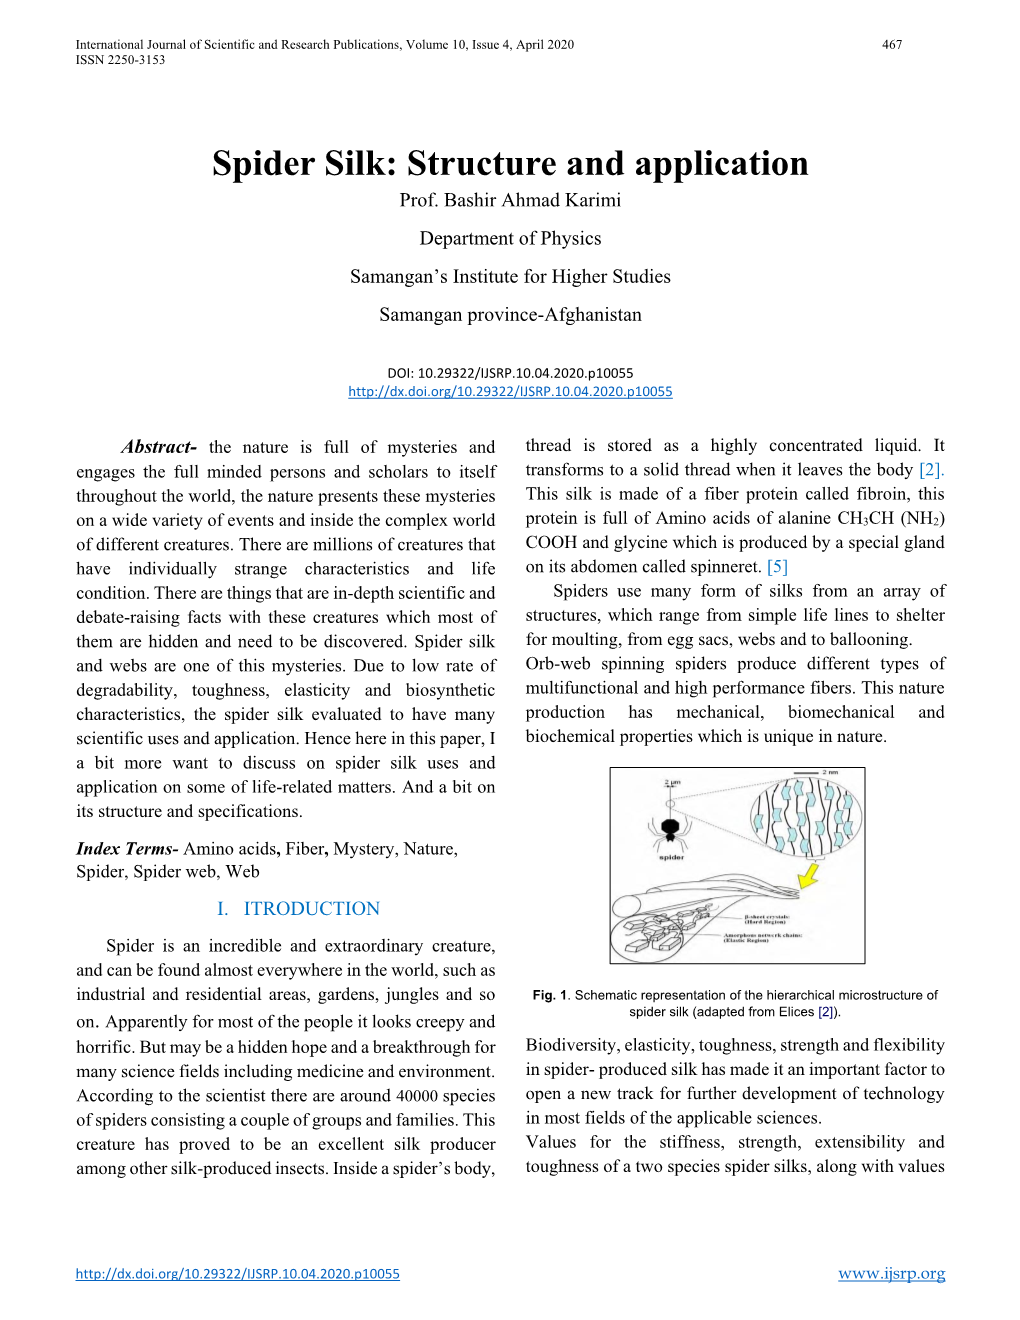 Spider Silk: Structure and Application Prof